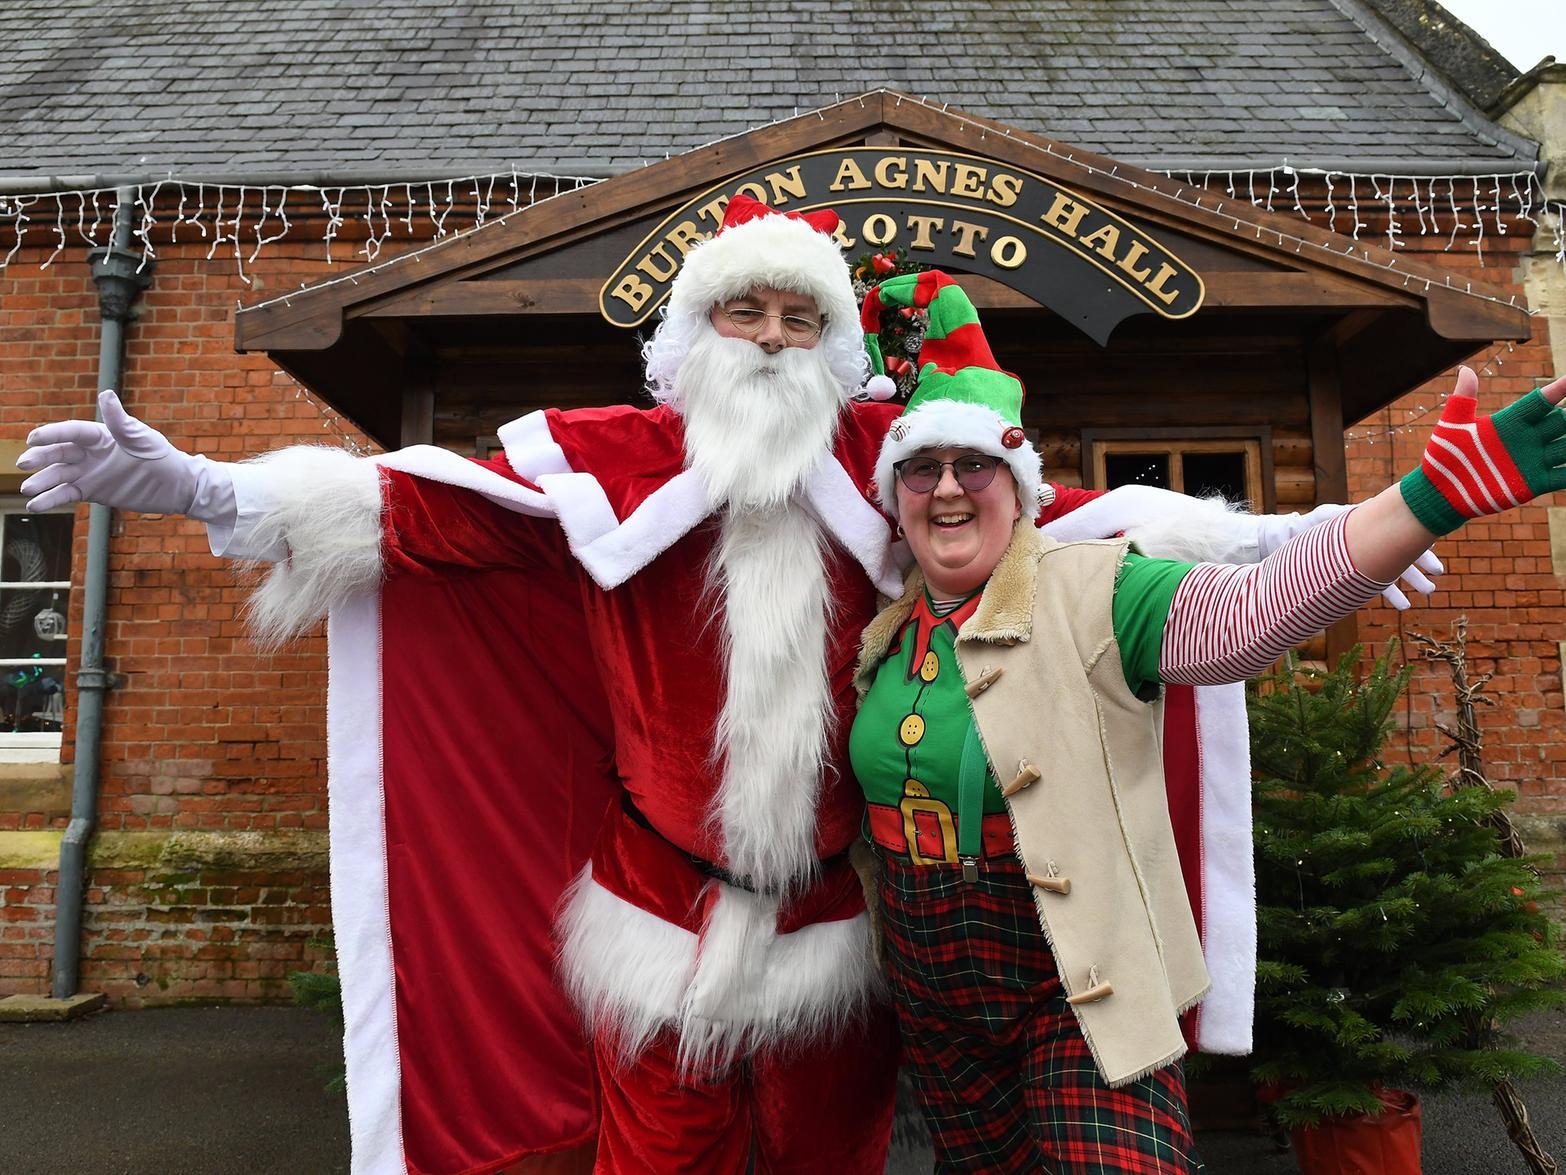 Santa with his helper in the courtyard grotto.